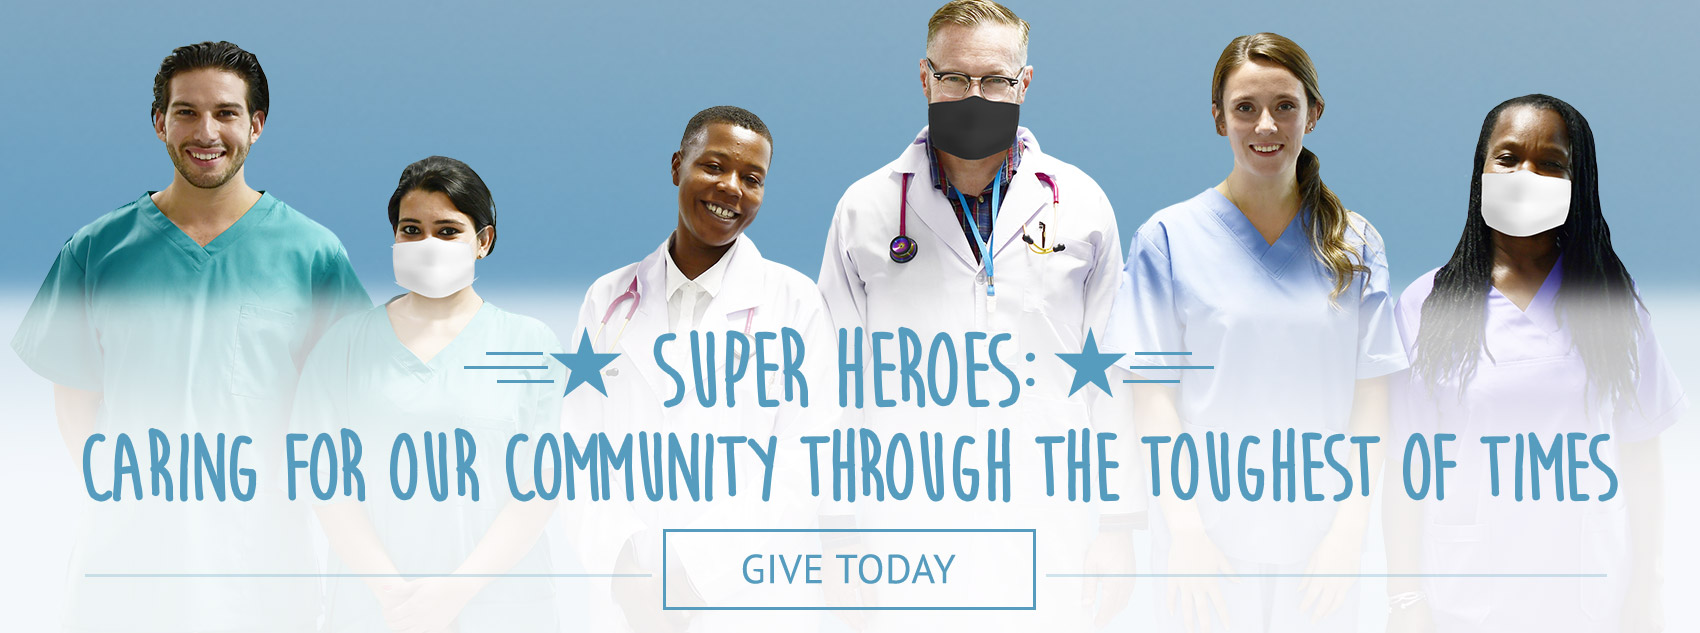 Super Heroes: Caring for Our Community Through the Toughest of Times